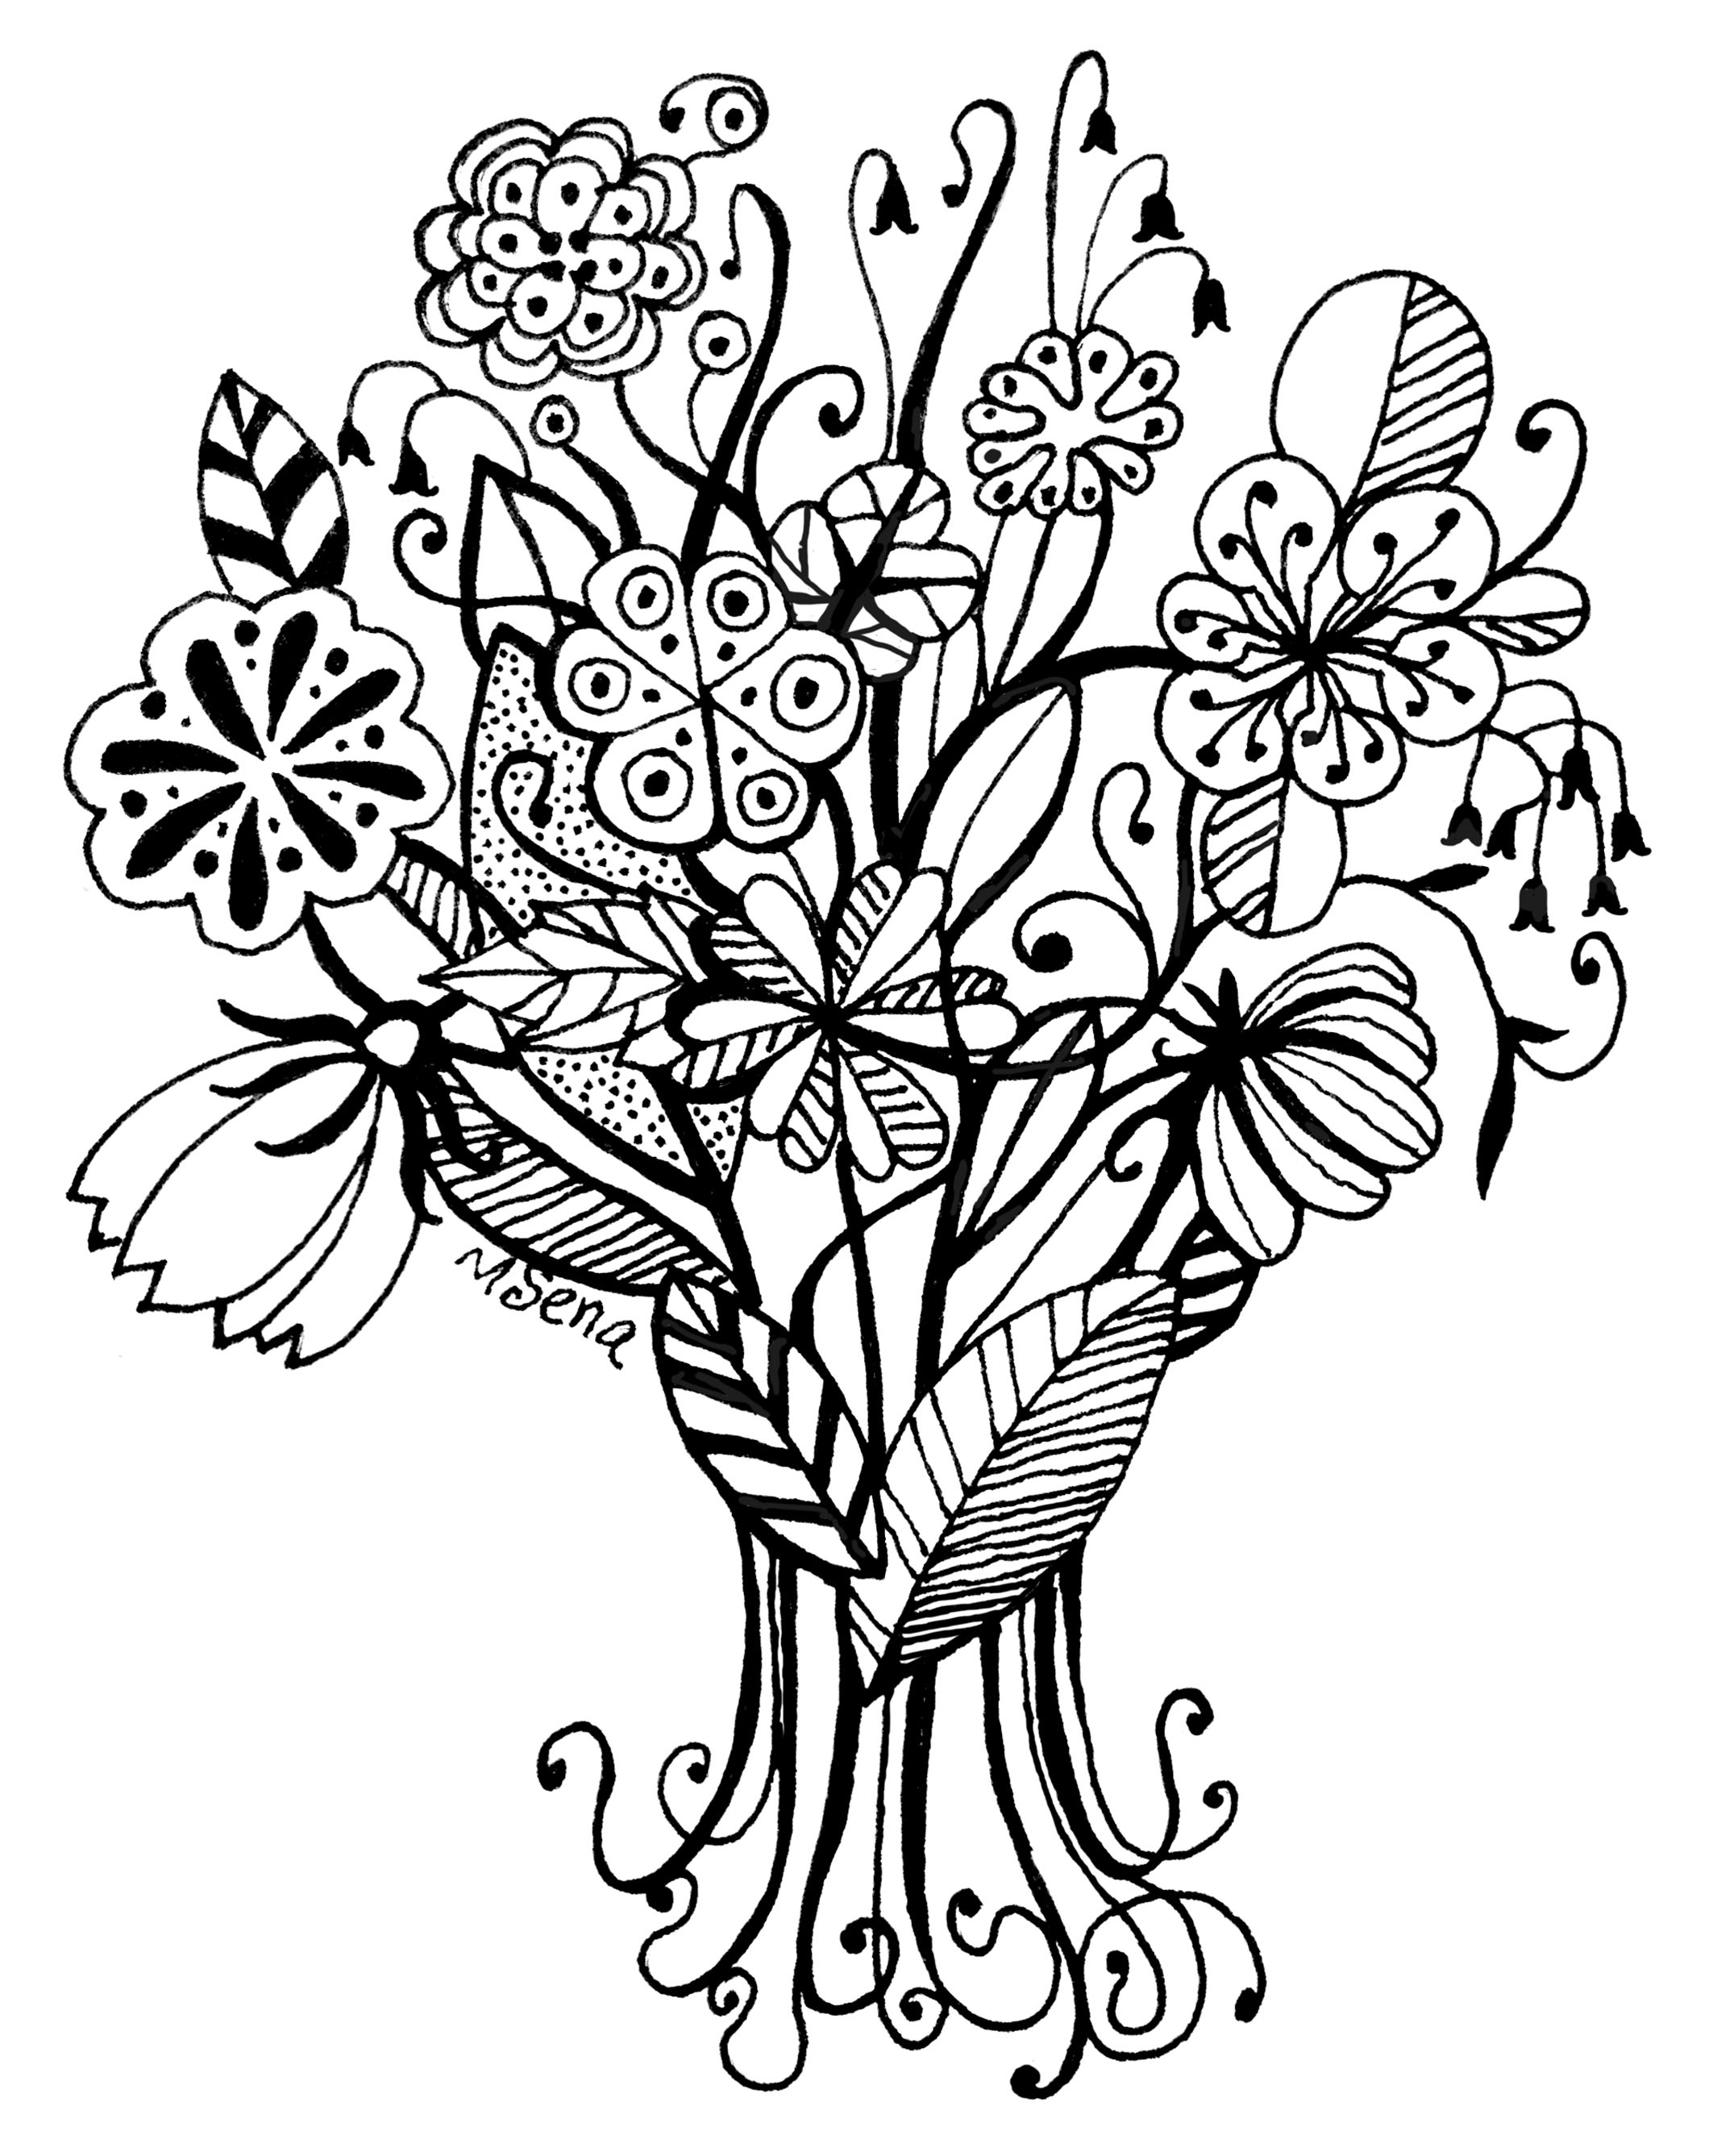 Doodle 80. Bouquet by Miyuki Sena illustrated with marker.